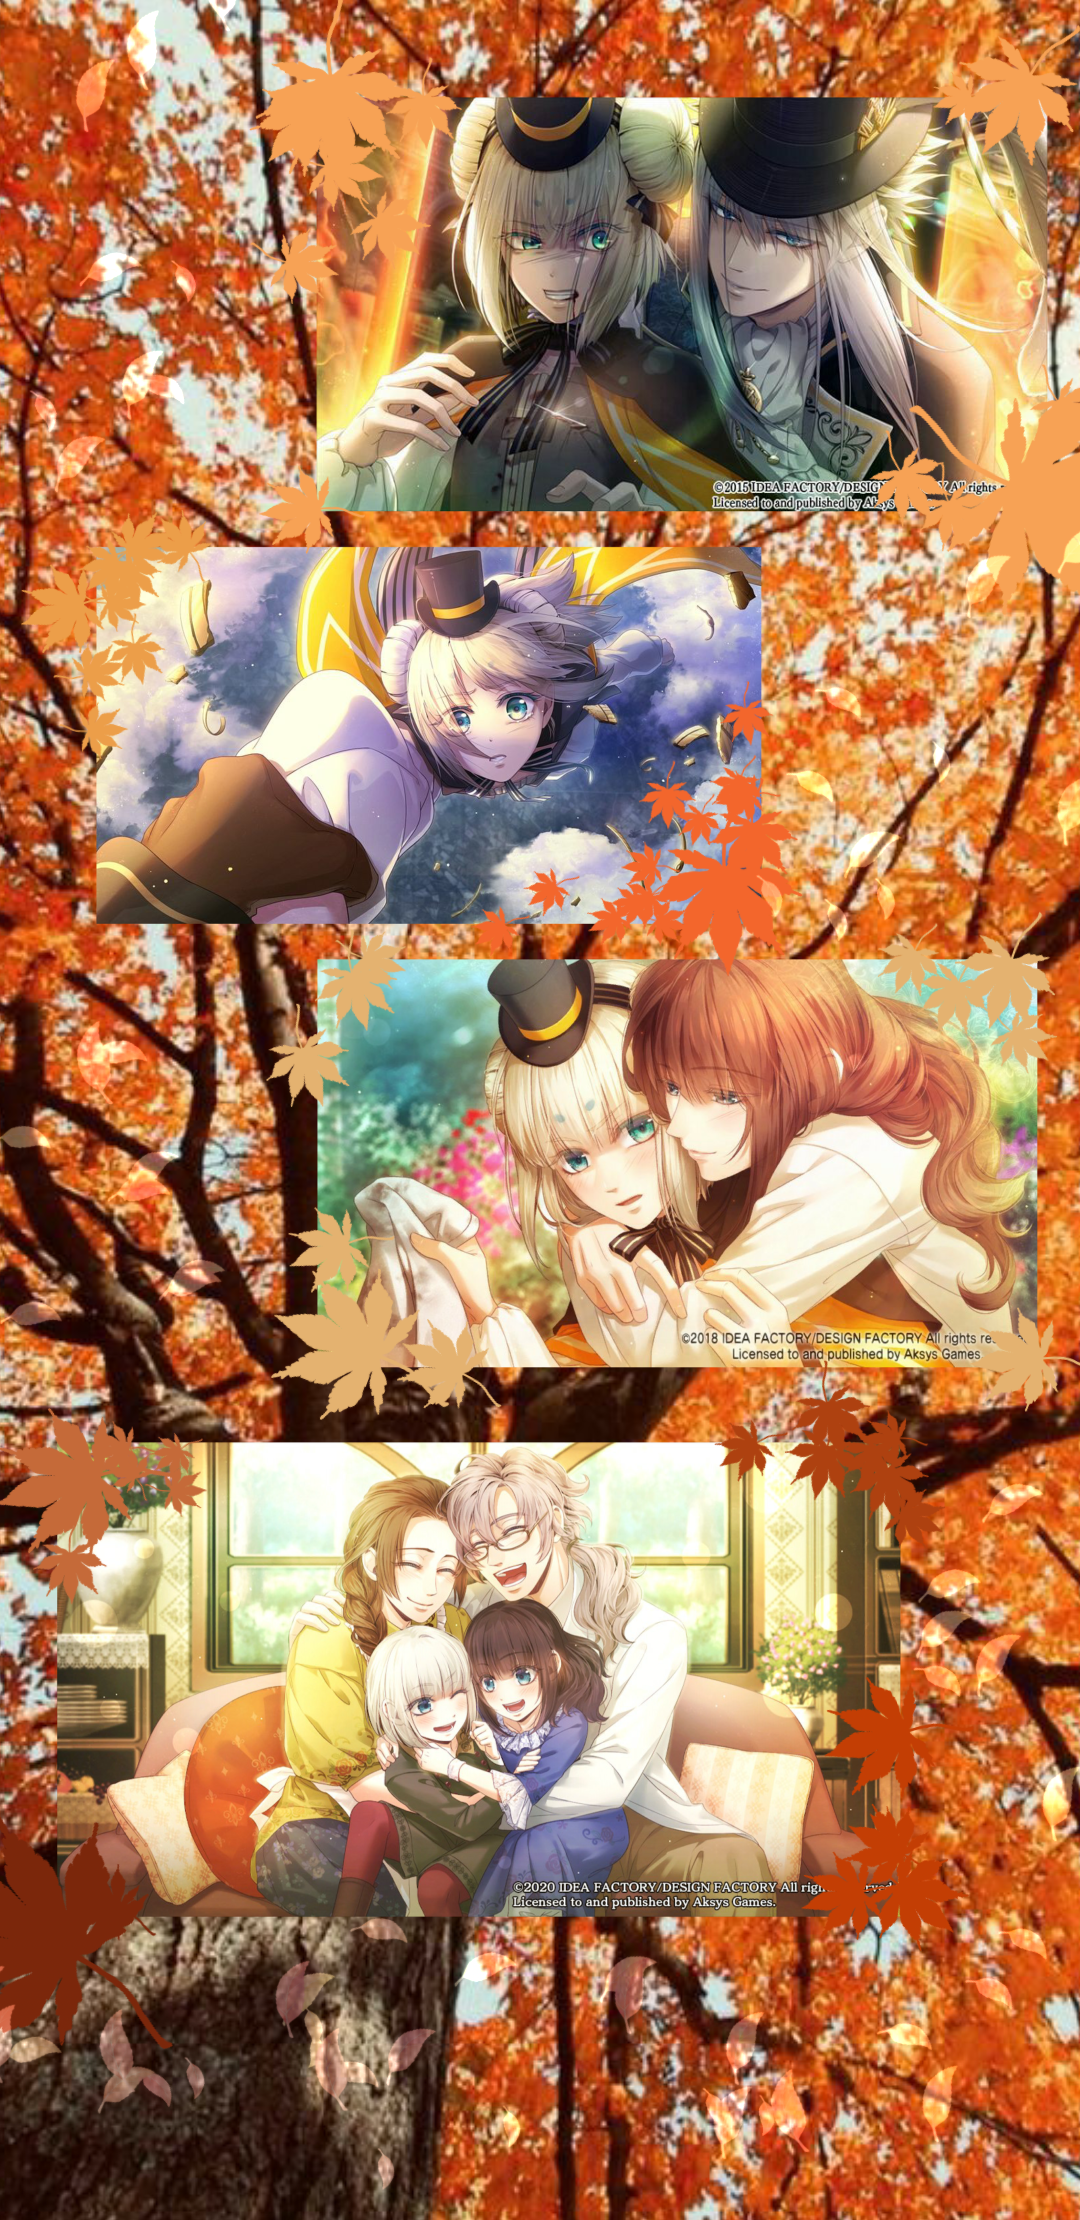 Code: Realize Wallpapers